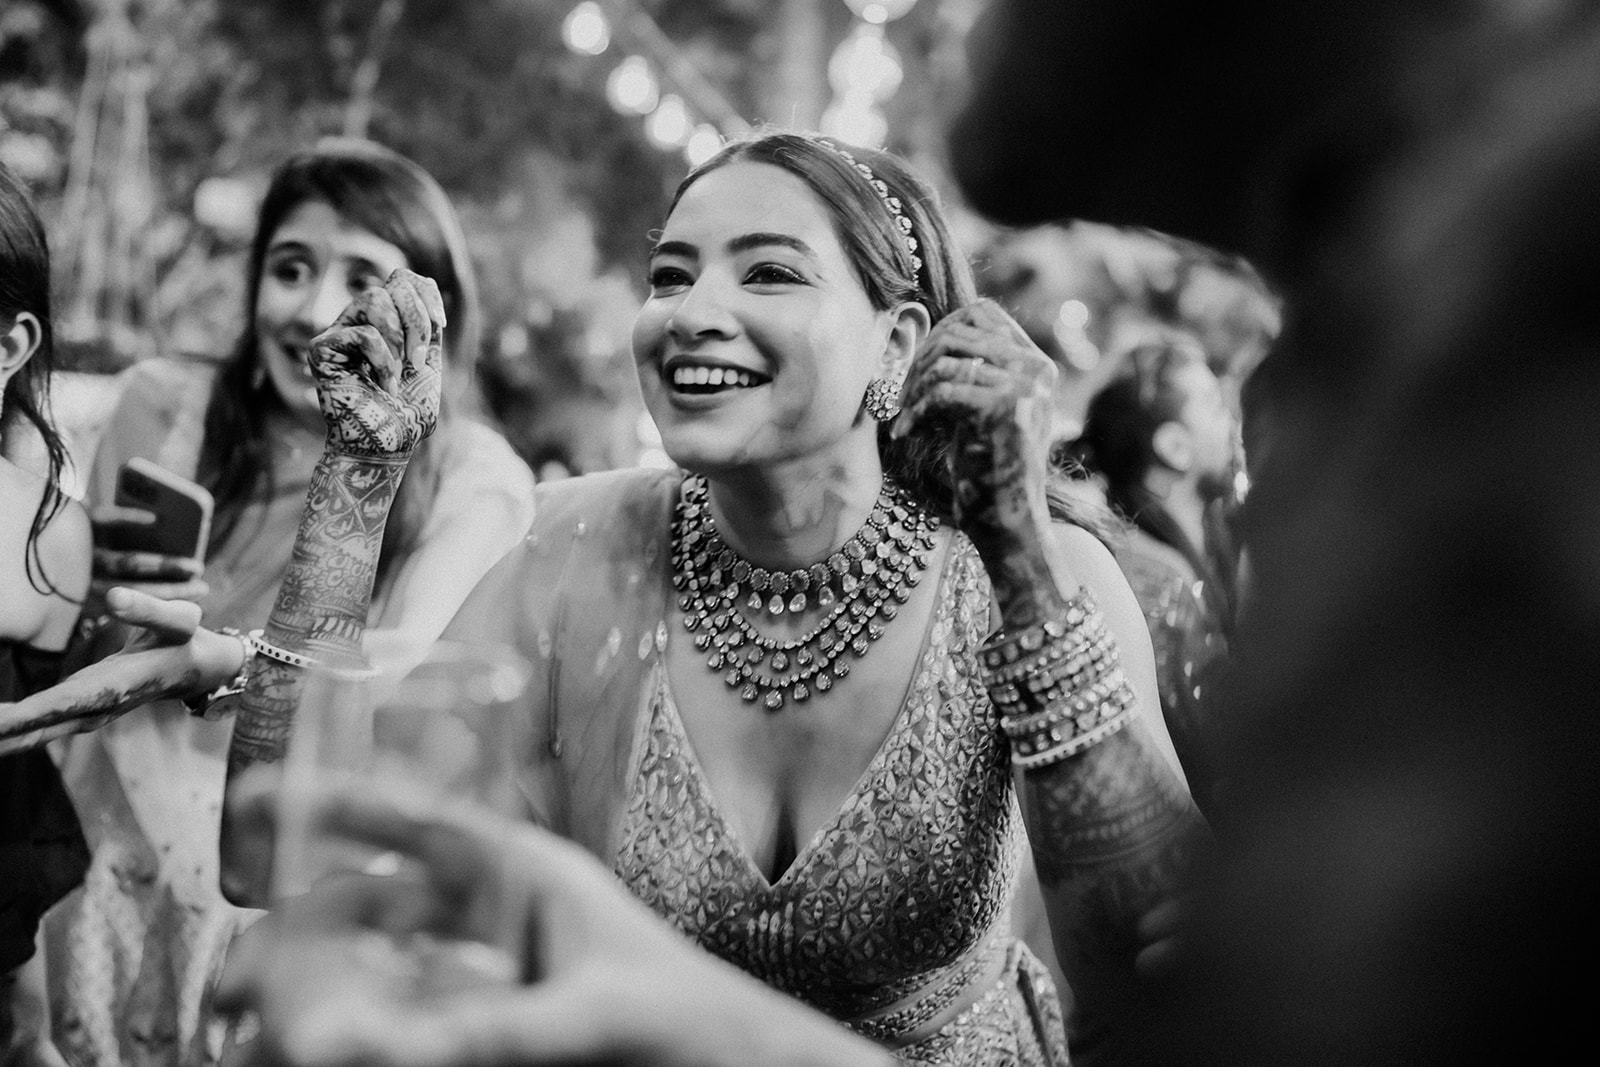 Celebration groove: Bride caught in the moment, dancing with infectious energy."